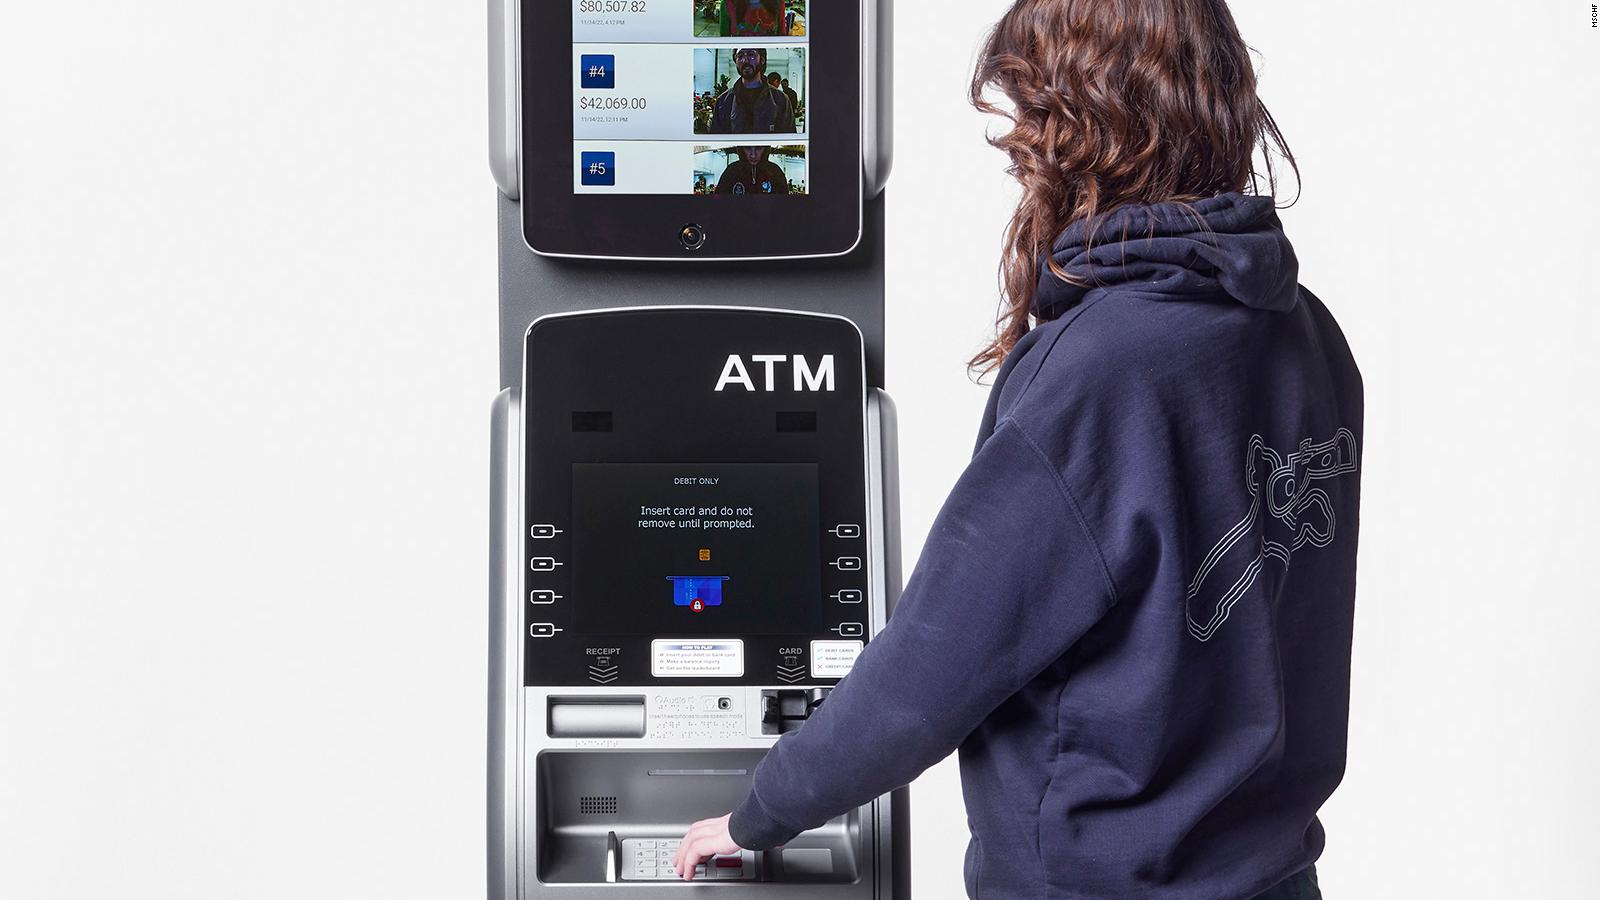 Fully Functional ATM at Art Basel Displays Your Photo and Checking Account Balance